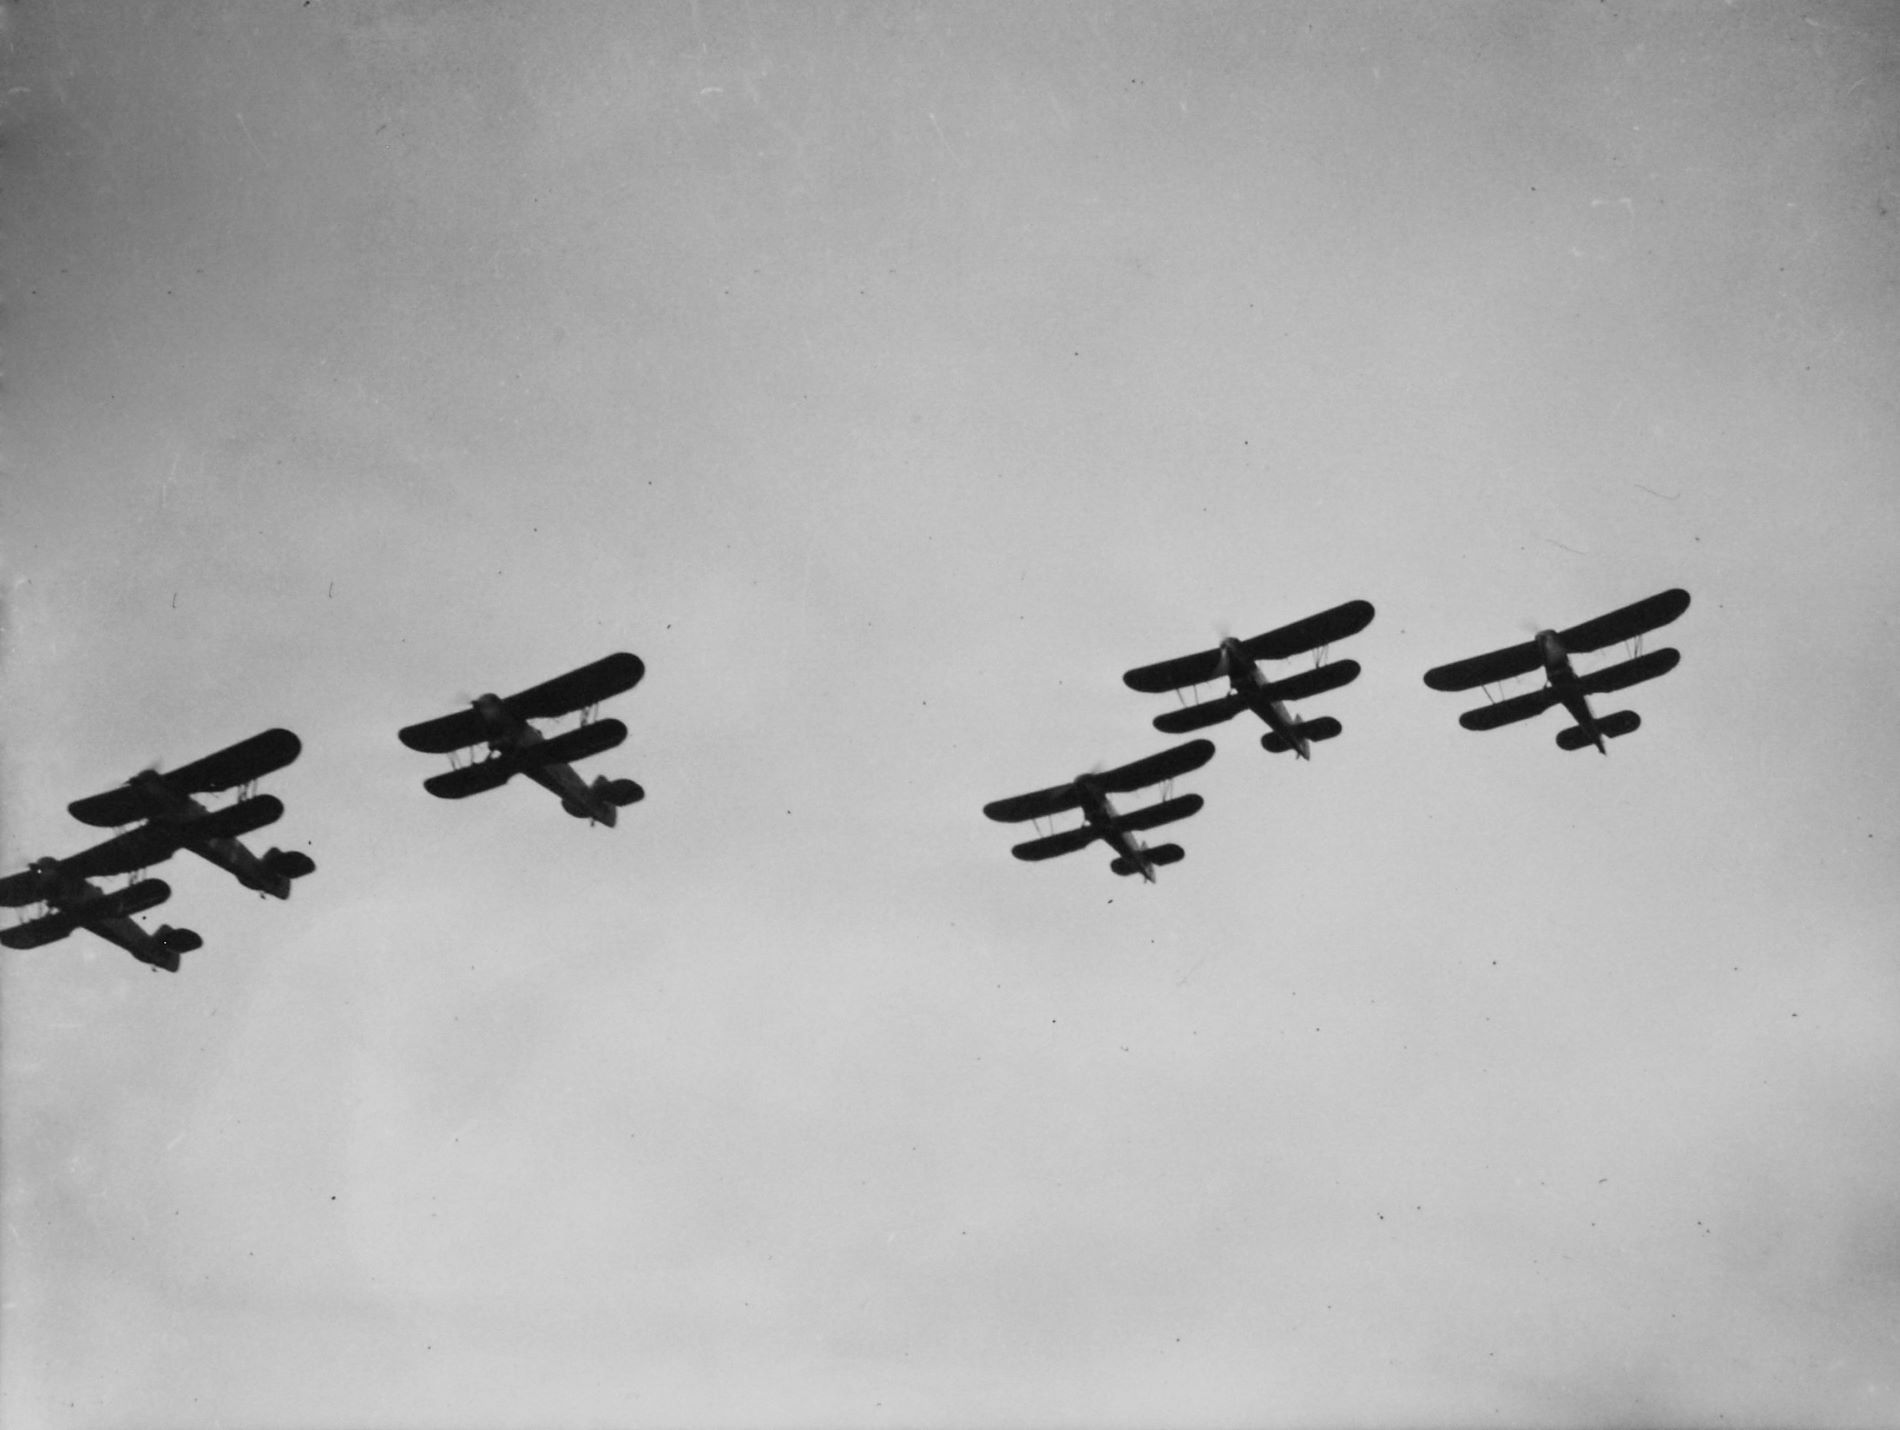 Black and white image of planes flying in chains as seen from the ground